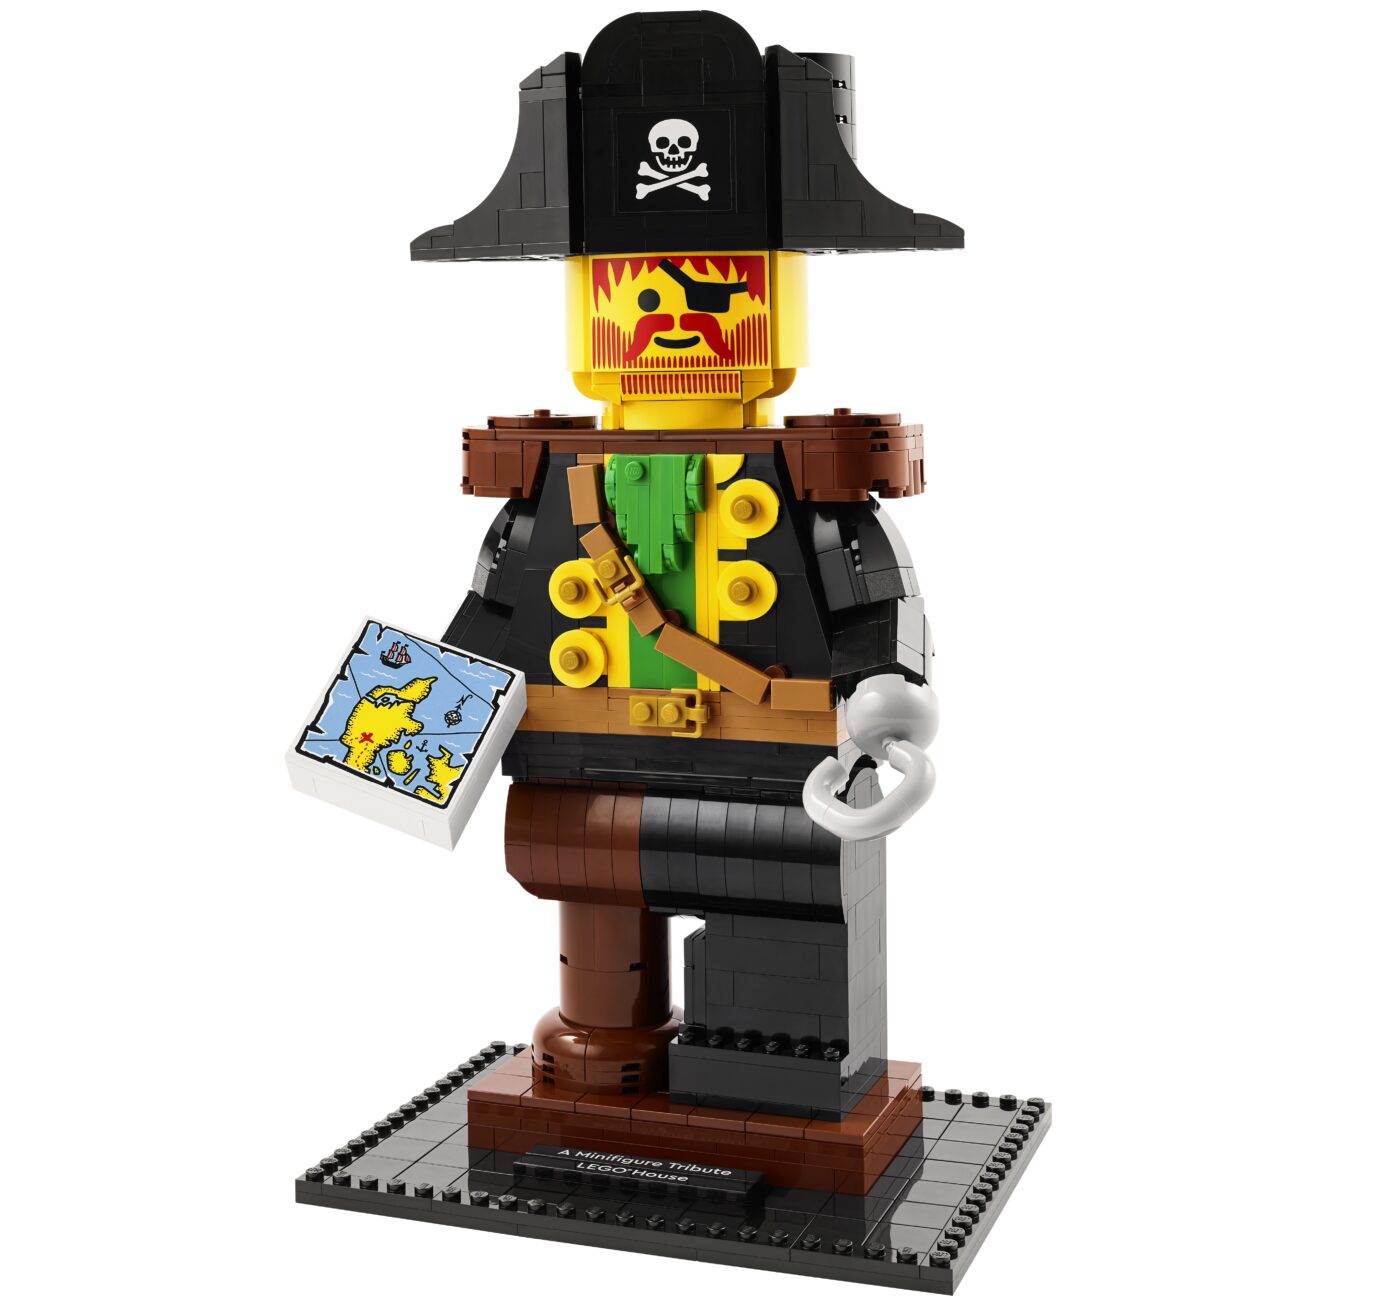 The 2023 LEGO House exclusive is a giant Classic Pirates Captain